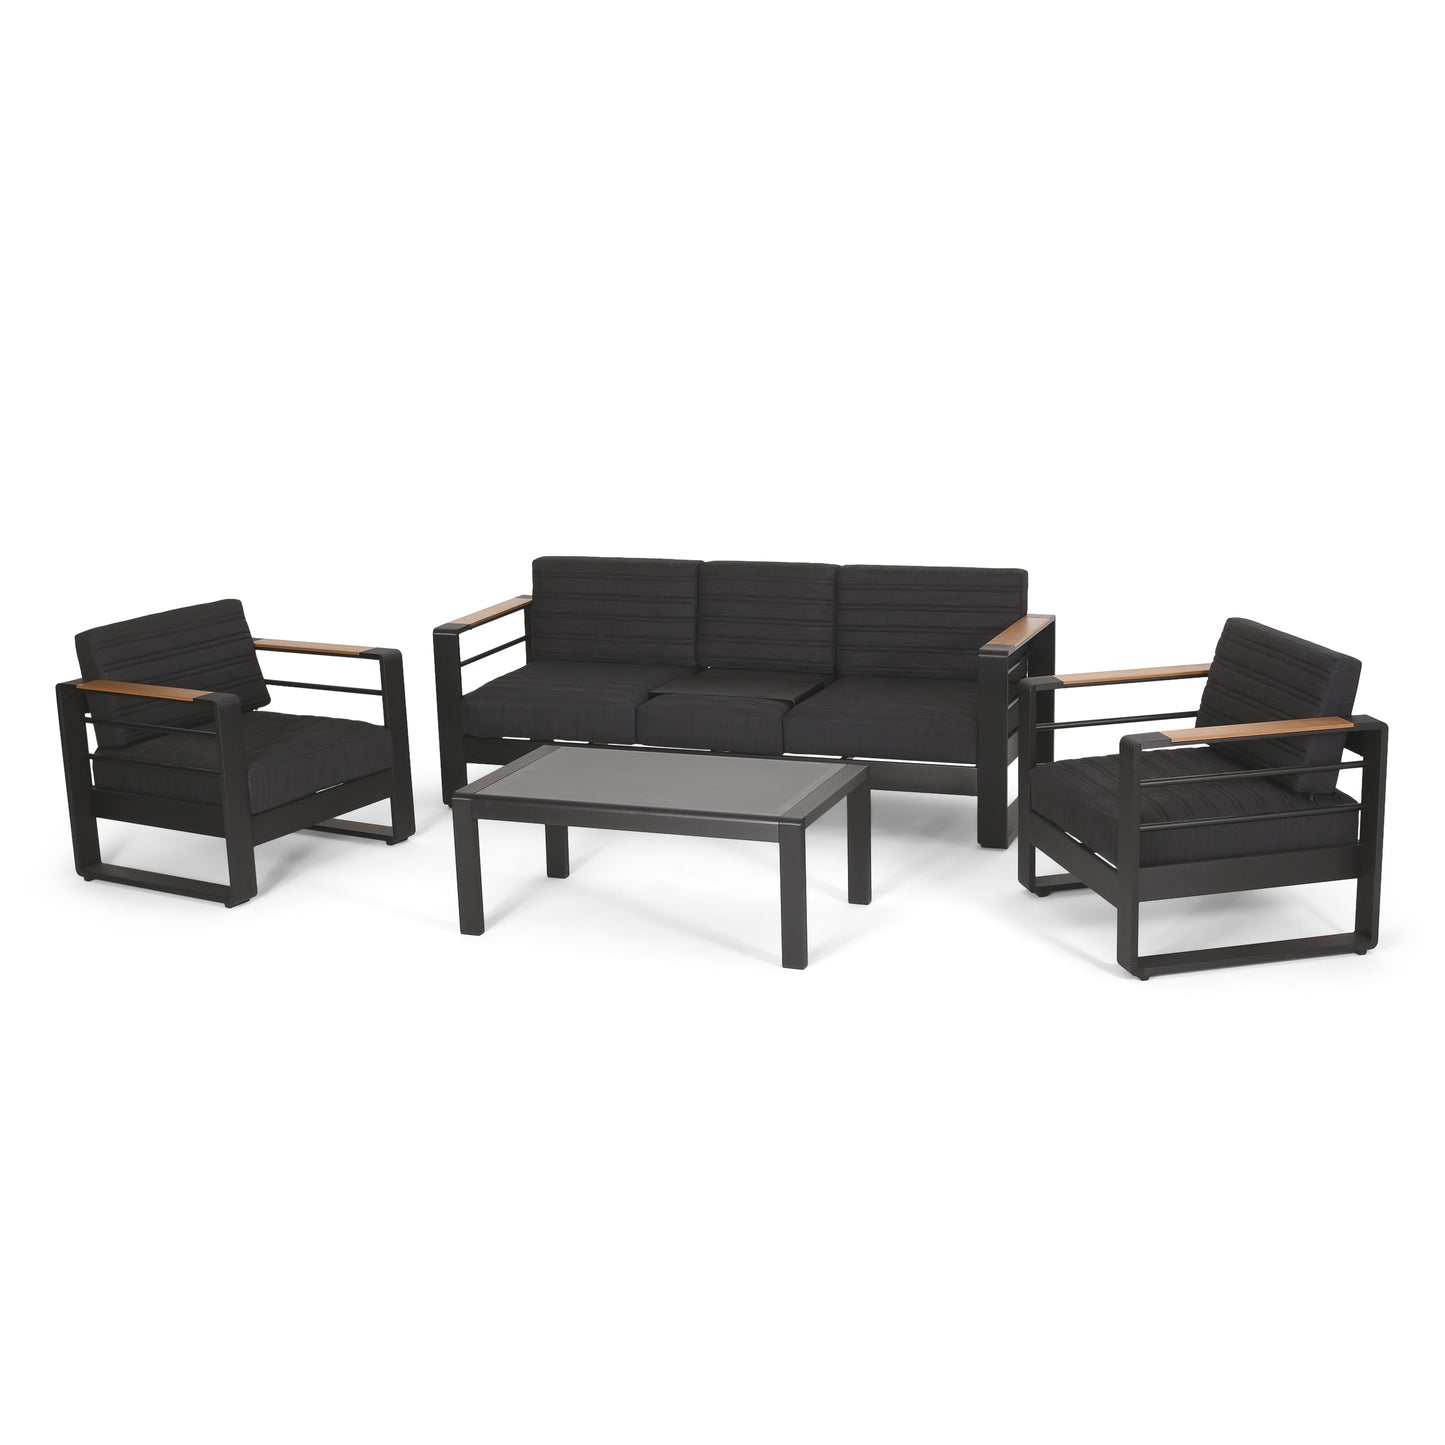 Neffs Outdoor Aluminum 5 Seater Chat Set with Water Resistant Cushions, Black, Natural, and Dark Gray